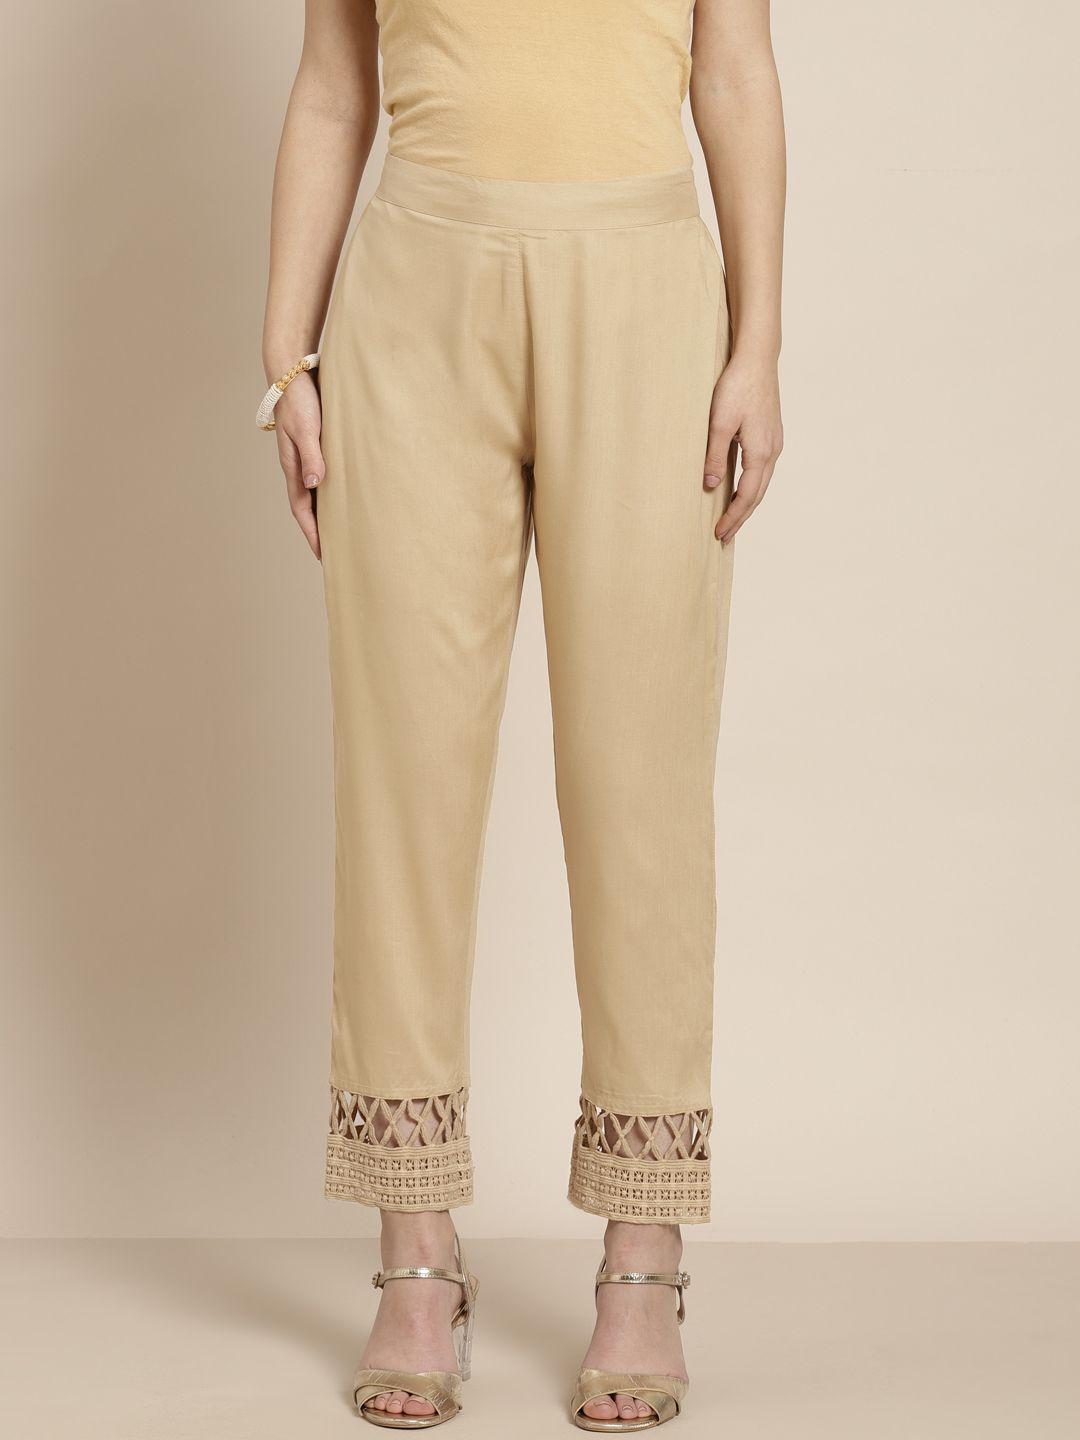 juniper women gold-toned solid pencil regular fit mid-rise trousers with knits detail